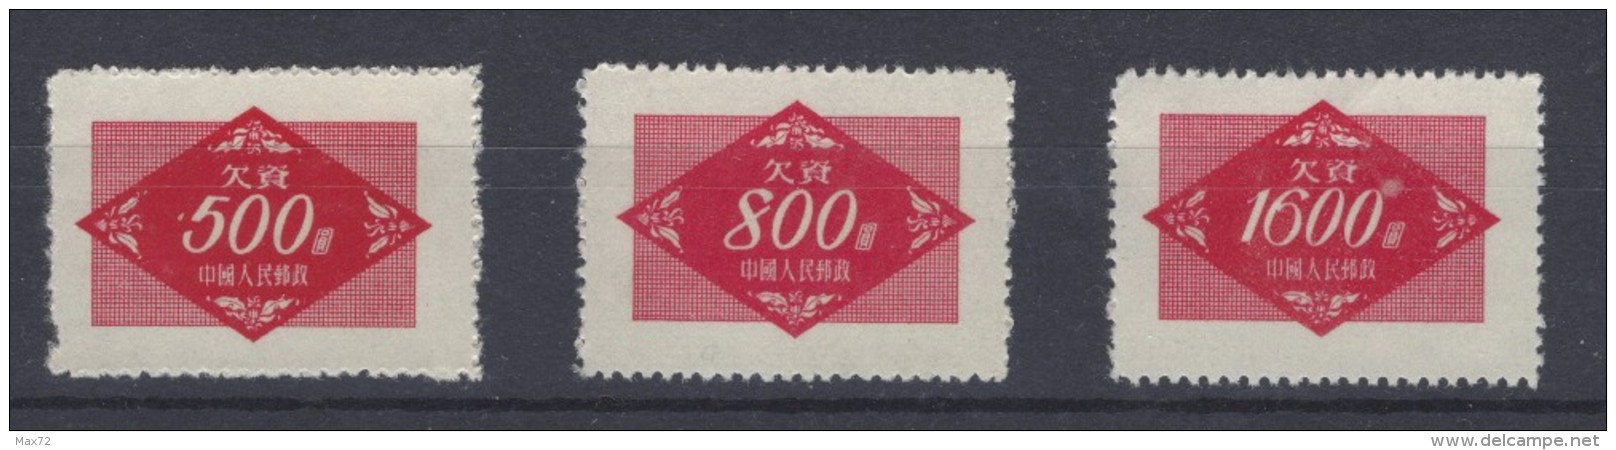 1954 CHINA MILITAR STAMPS MICHEL NR 12/14 MNH WG LIKE USUAL - Franchise Militaire